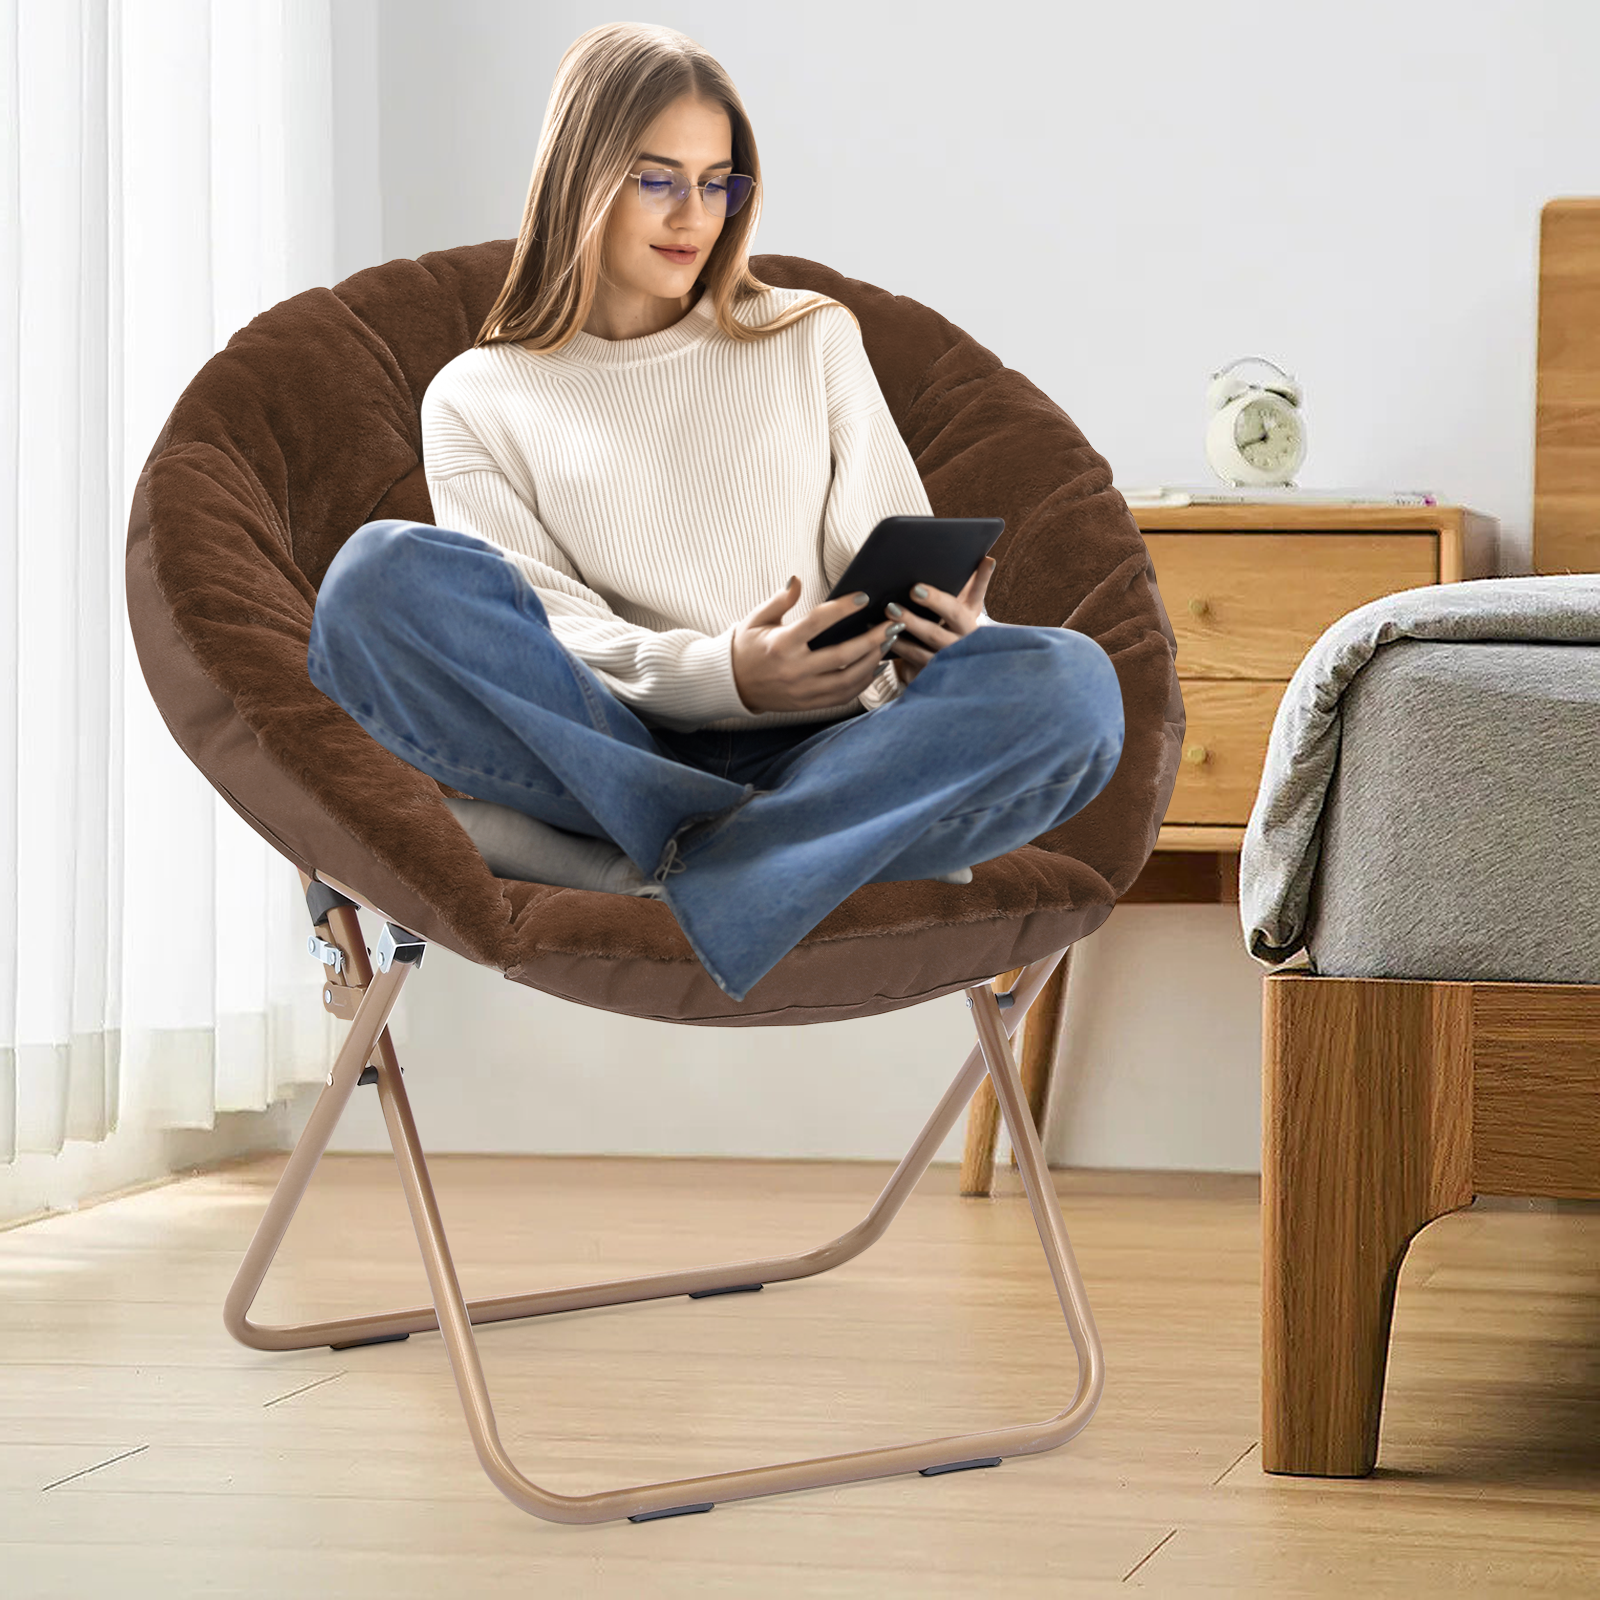 Magshion 2-Piece Folding Lounge Chair Comfy Faux Fur Saucer Chair, Cozy Moon Chair Seating with Metal Frame for Home Living Room Bedroom, Brown - image 4 of 10